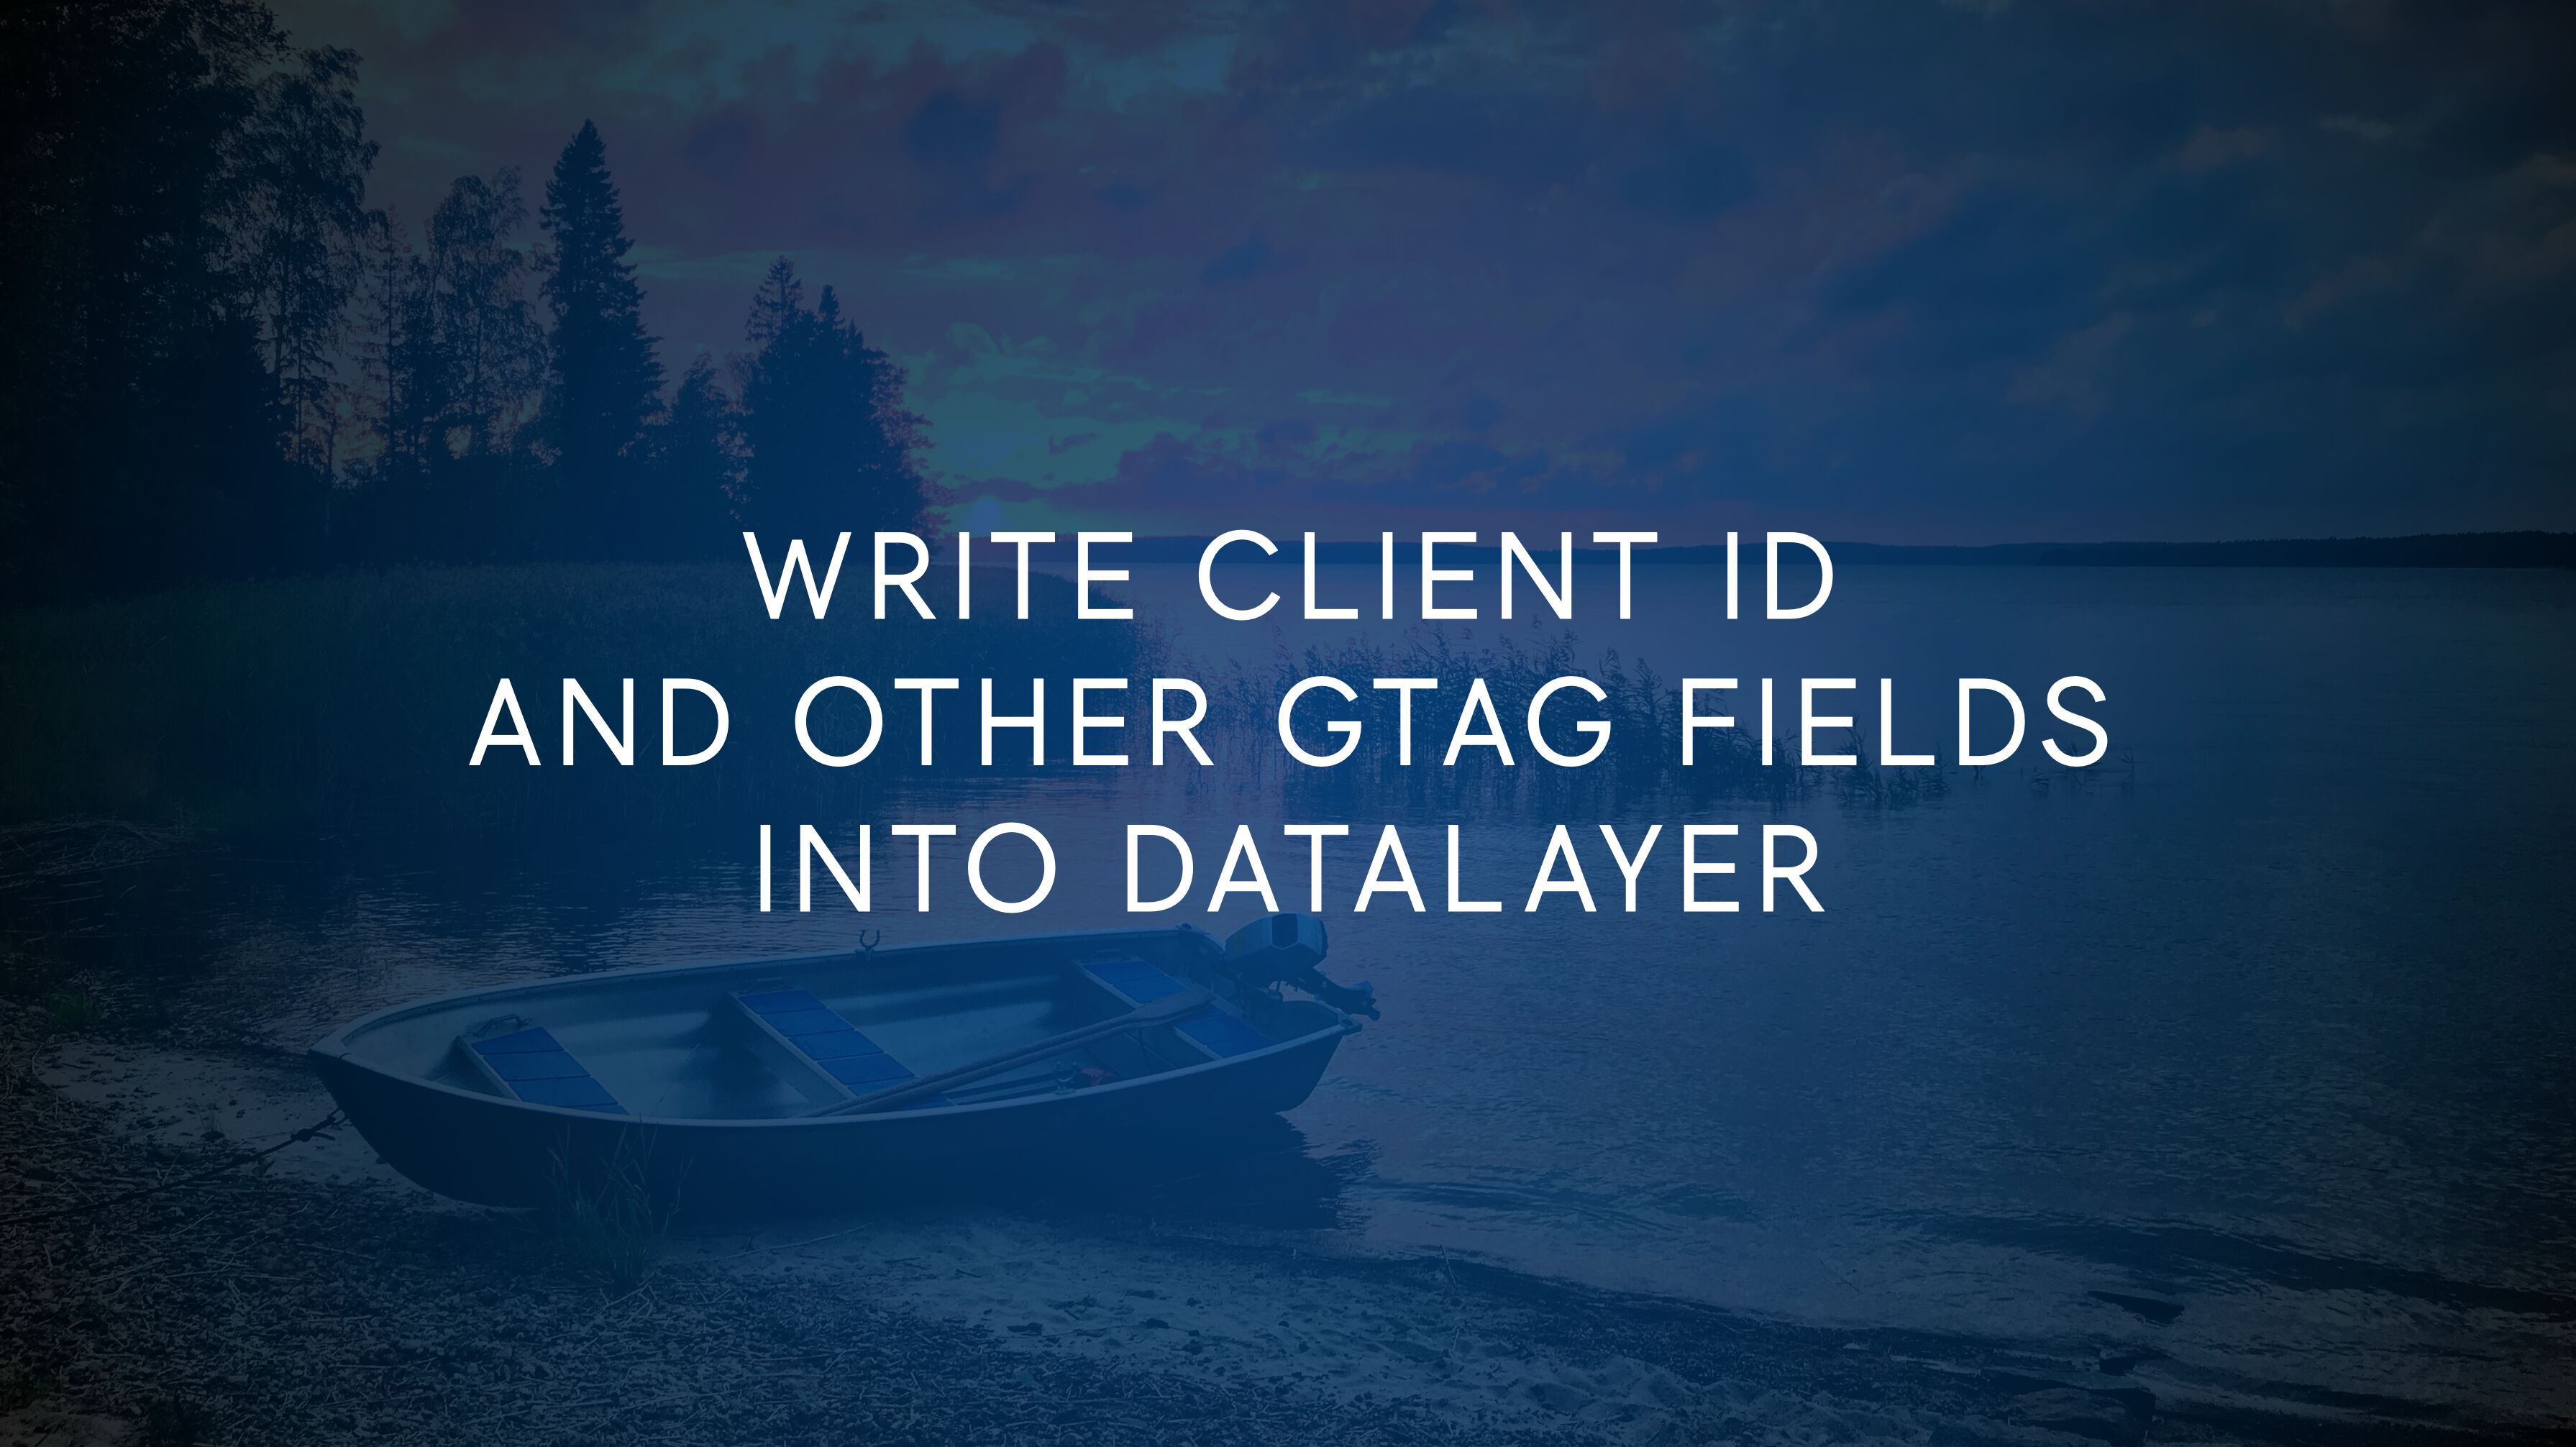 #GTMTips: Write Client ID And Other GTAG Fields Into dataLayer